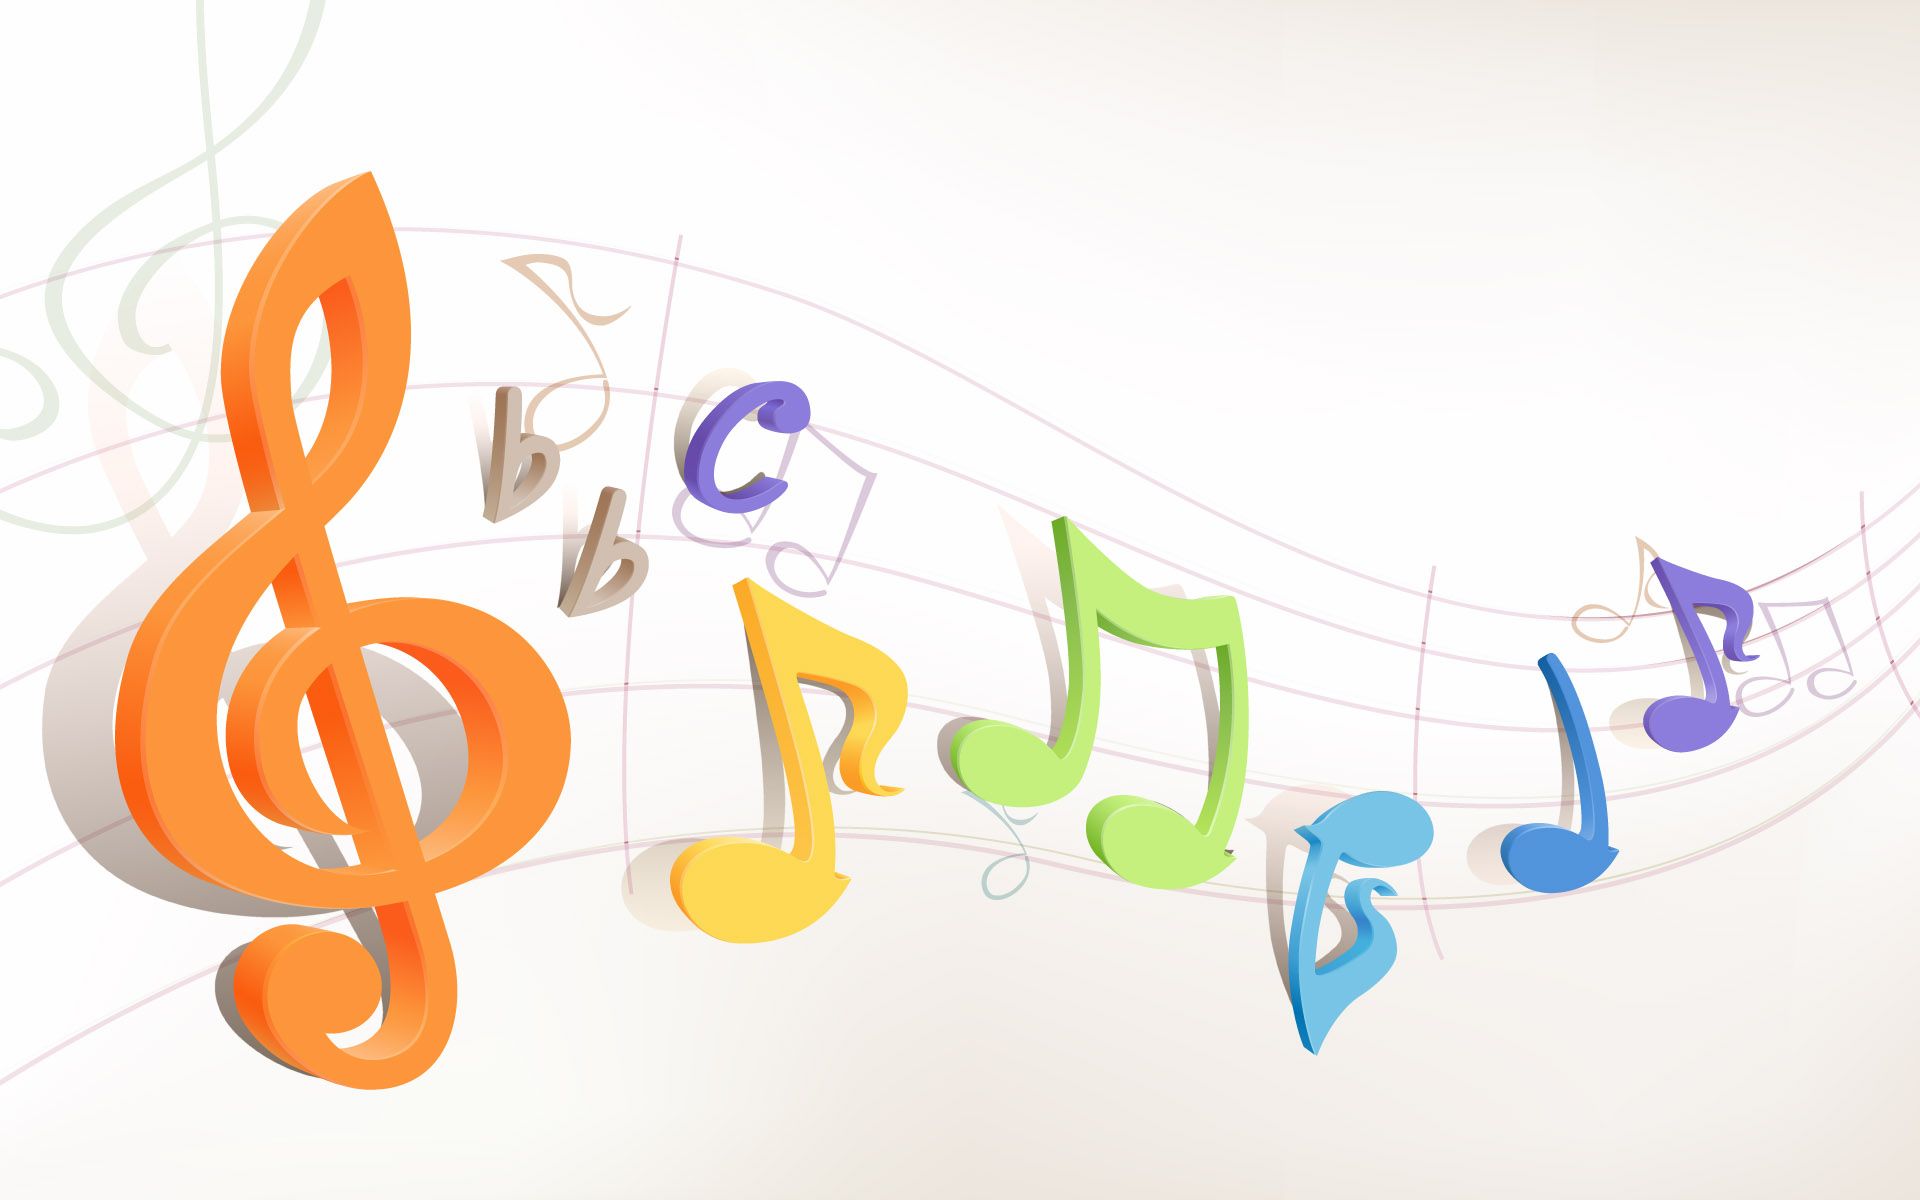 Free Music Note Symbol Picture, Download Free Clip Art, Free Clip